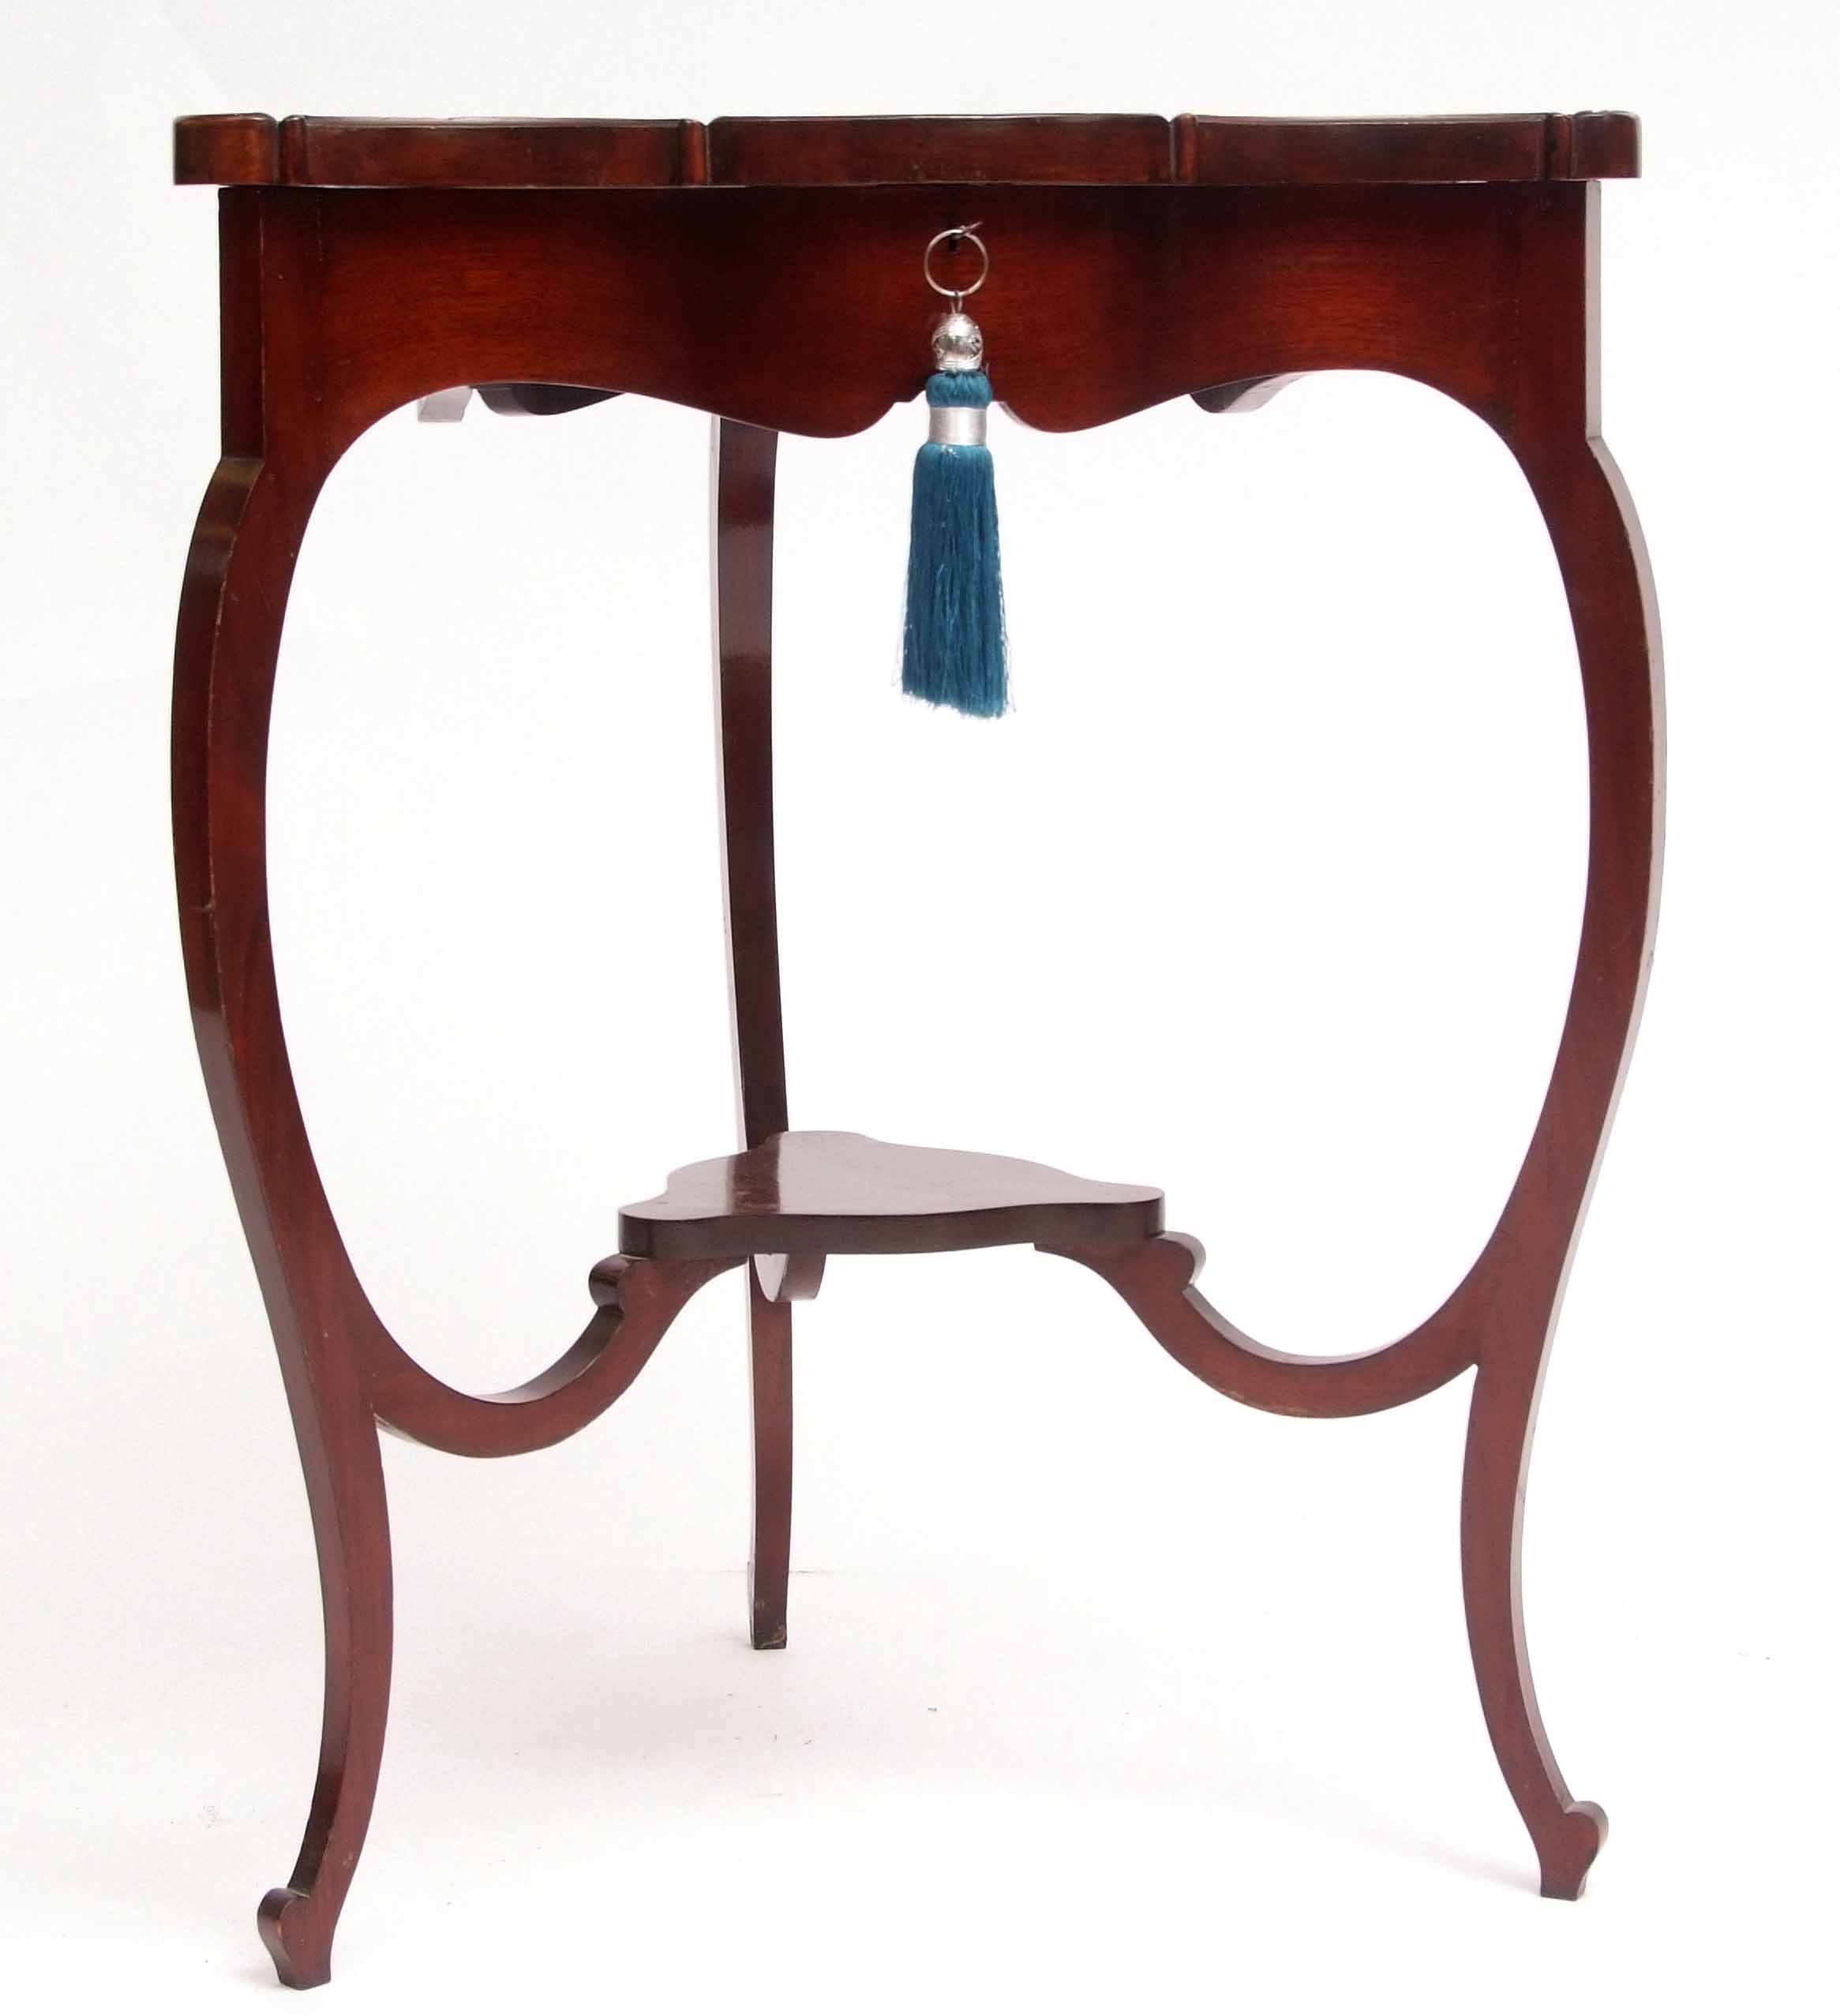 Mahogany bijouterie table of shaped triangular form, the lifting lid with central bevelled glass - Image 2 of 5